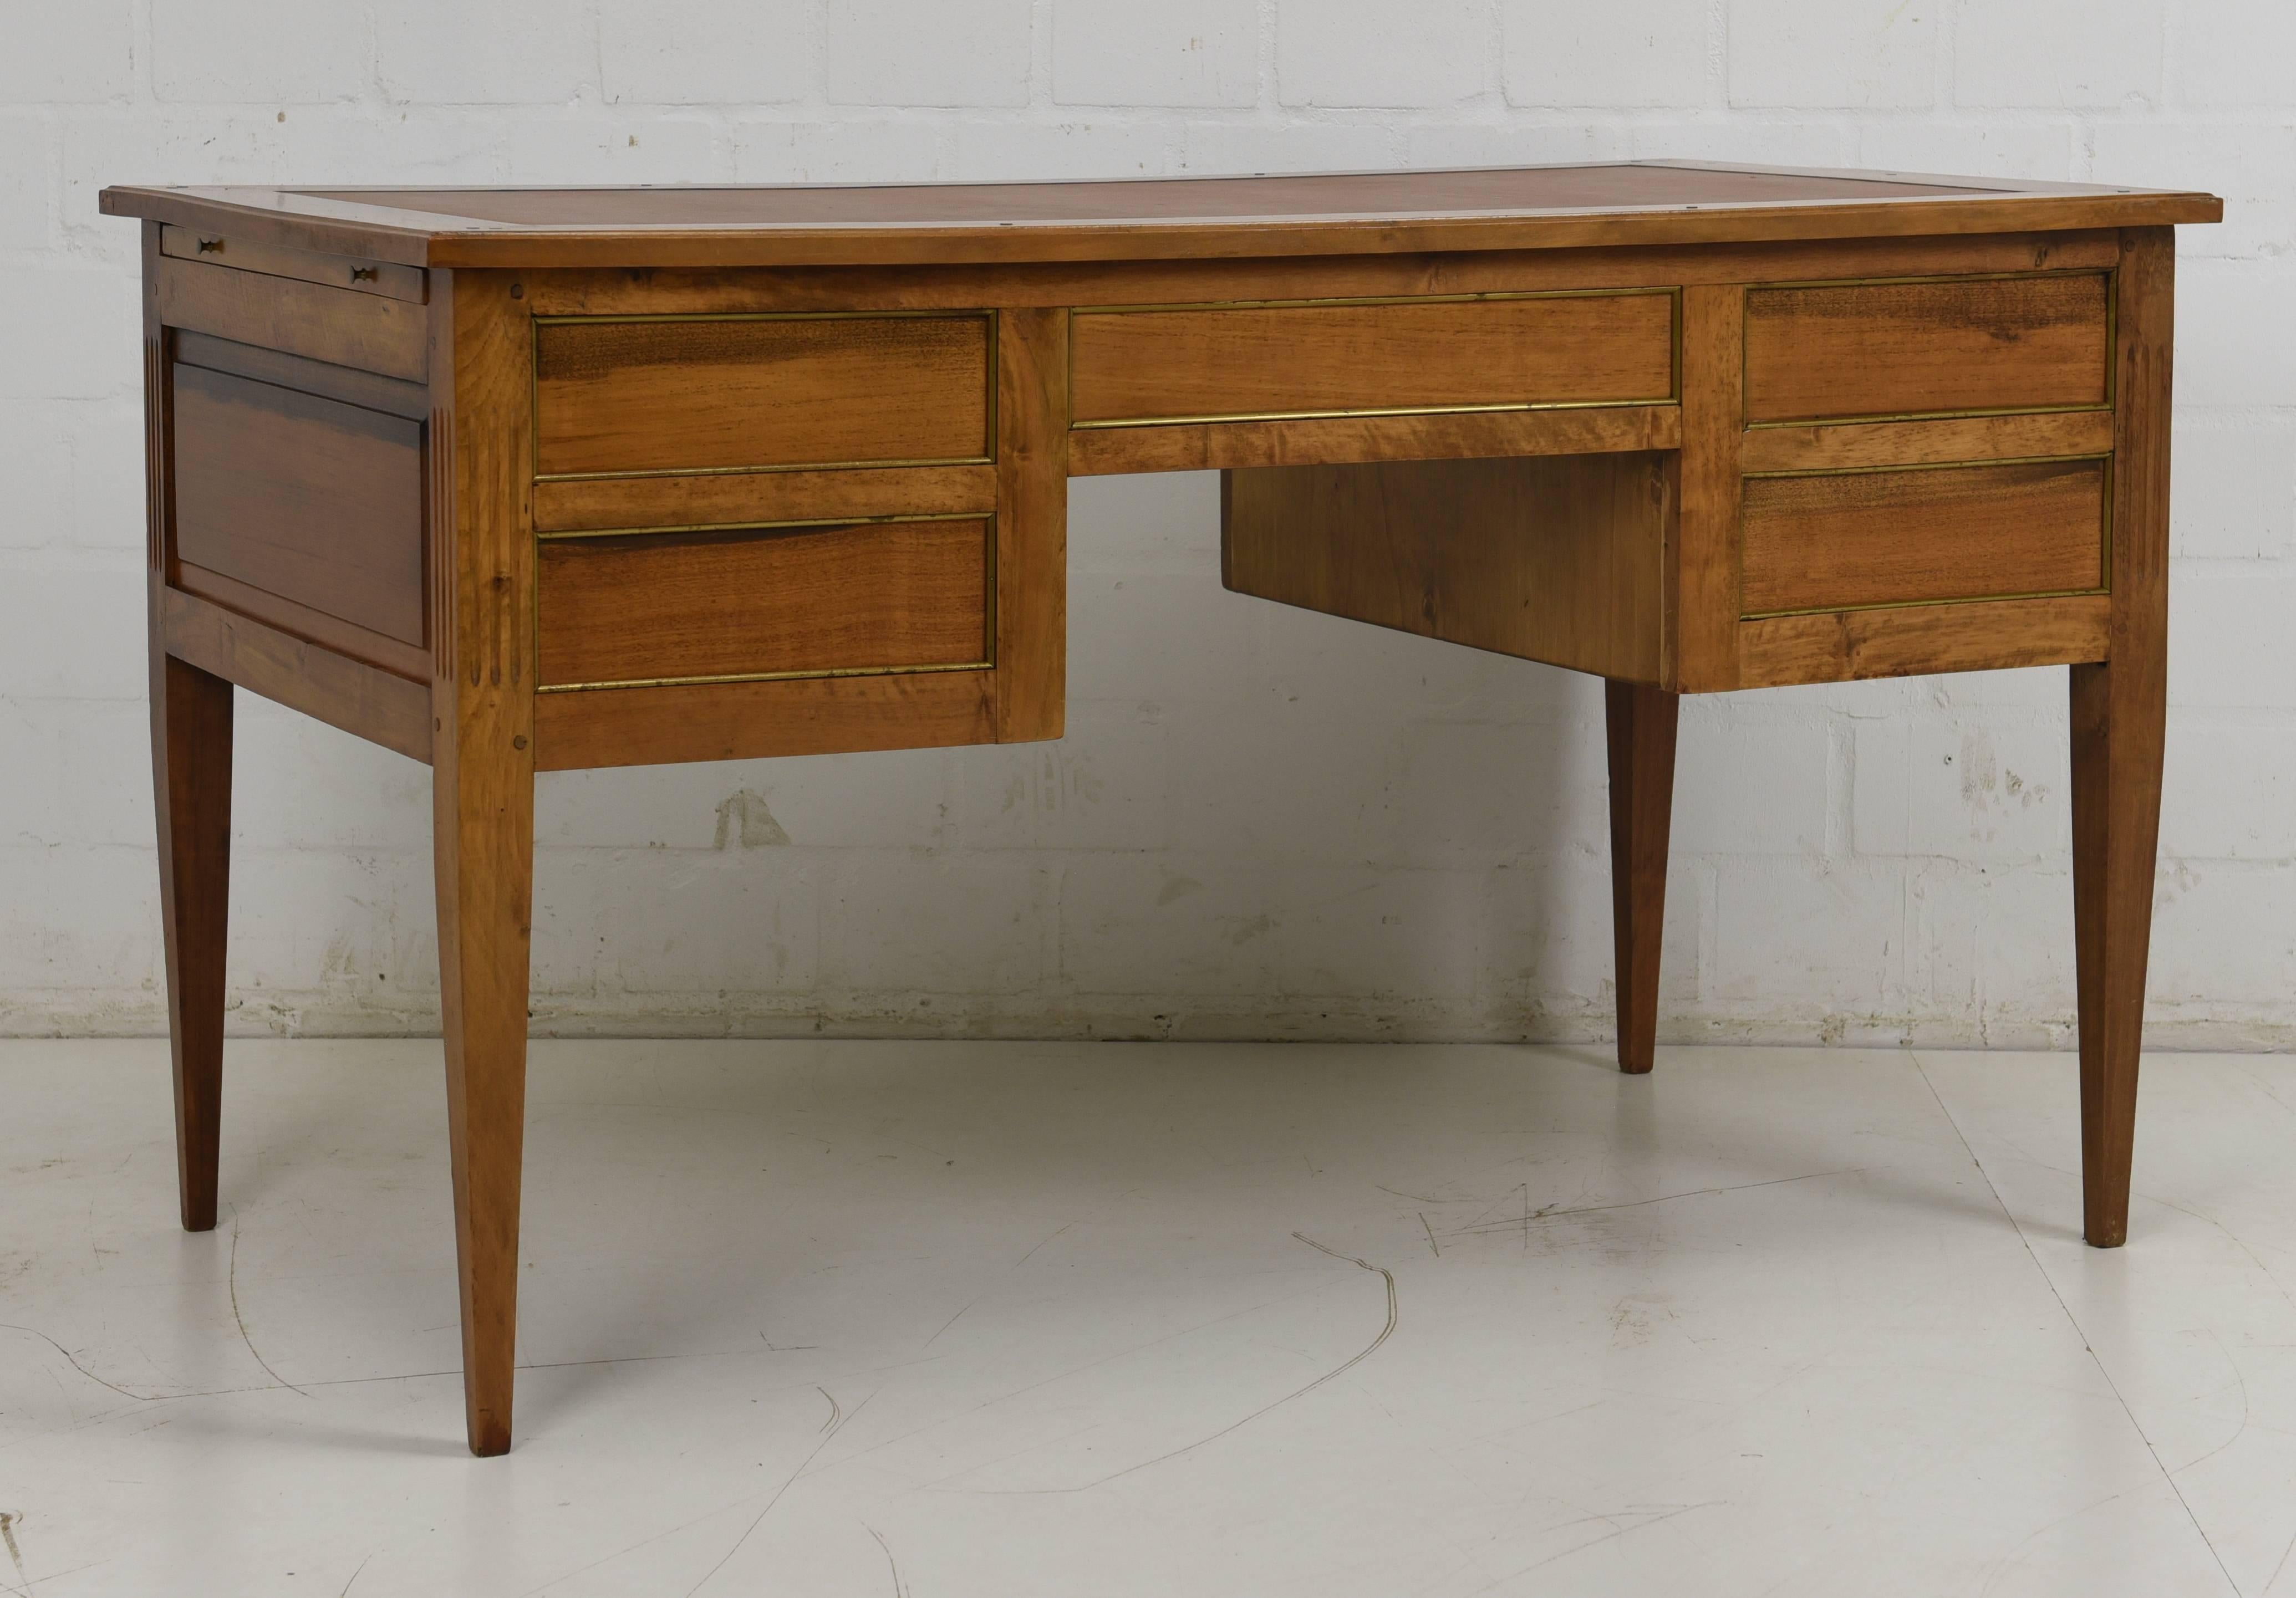 Early 20th Century 1920s Desk from the Art Nouveau Period